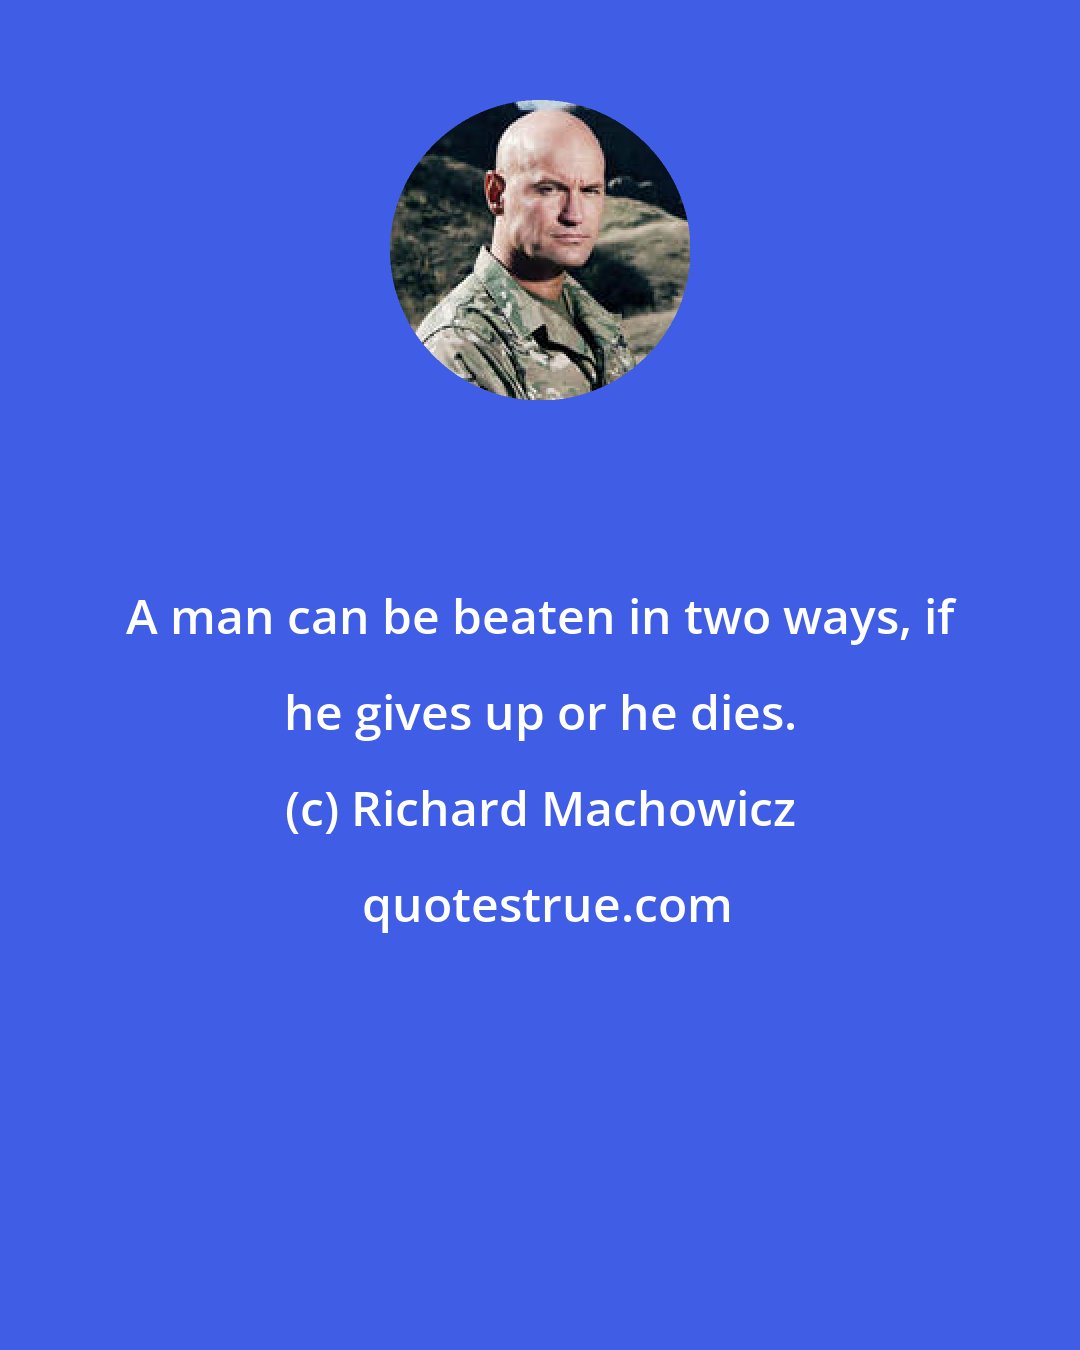 Richard Machowicz: A man can be beaten in two ways, if he gives up or he dies.